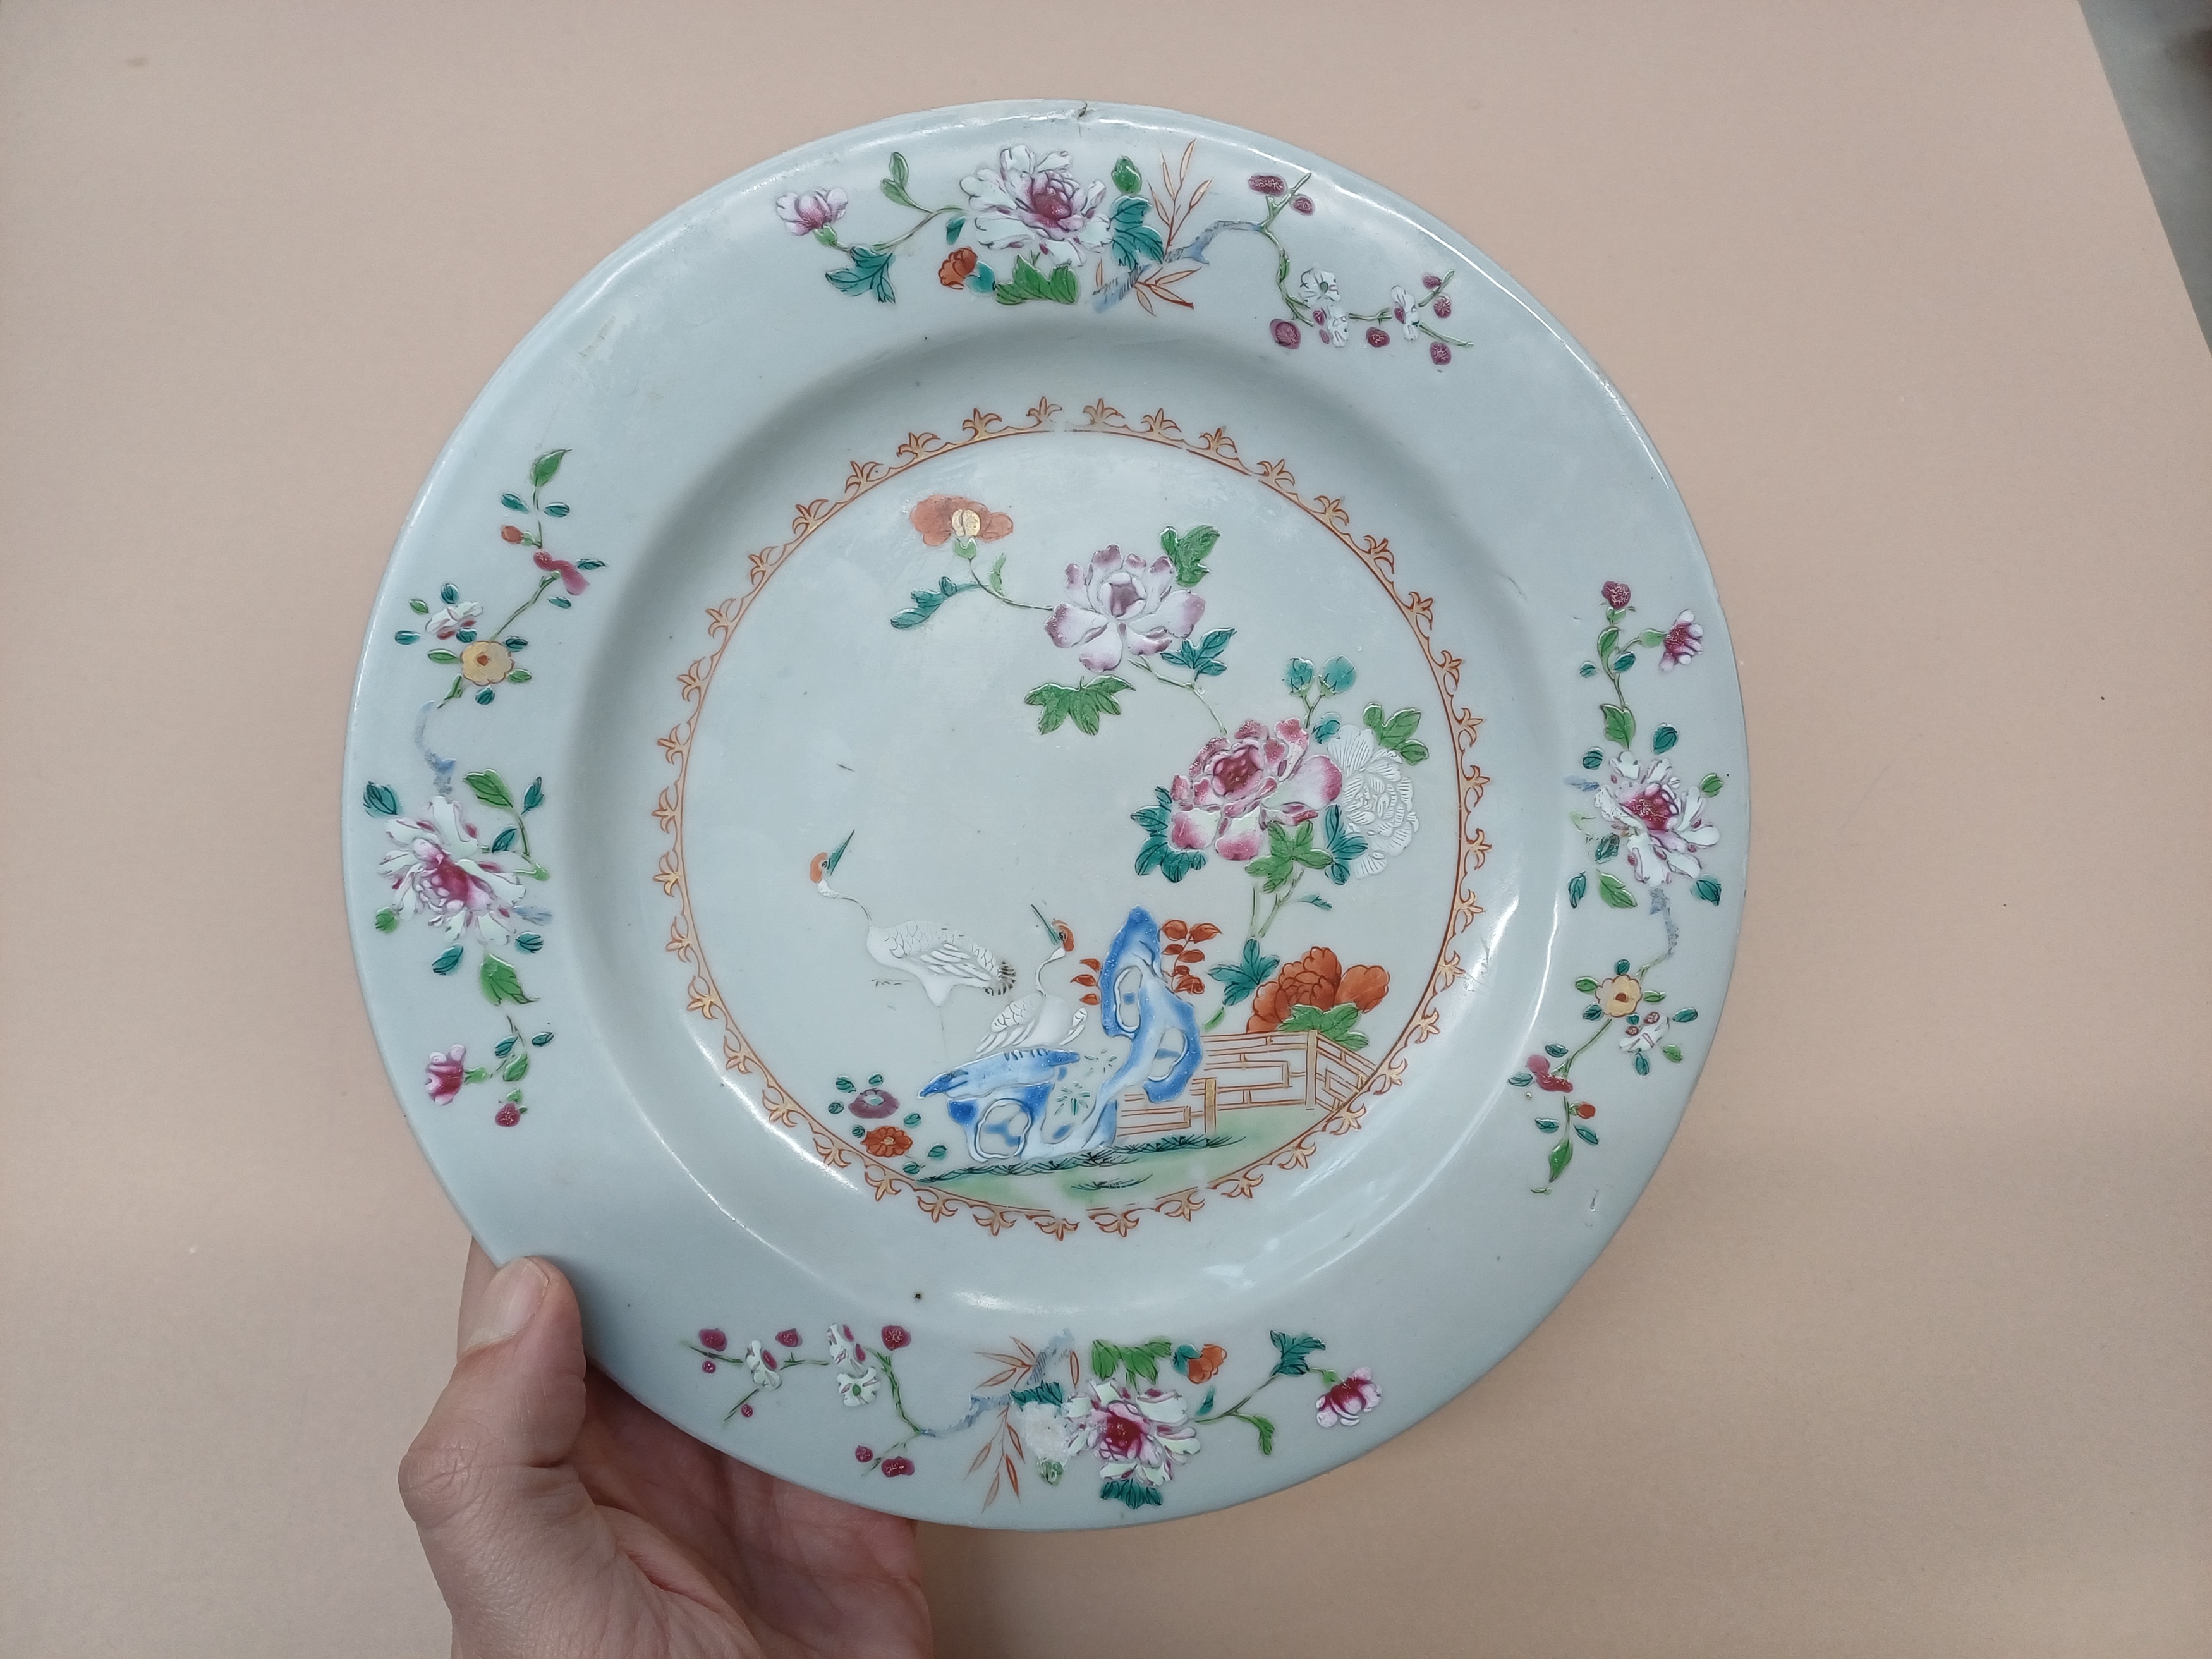 TWO CHINESE EXPORT FAMILLE-ROSE 'CRANES AND BLOSSOMS' DISHES 清十八世紀 外銷粉彩牡丹鶴紋盤兩件 - Image 9 of 15